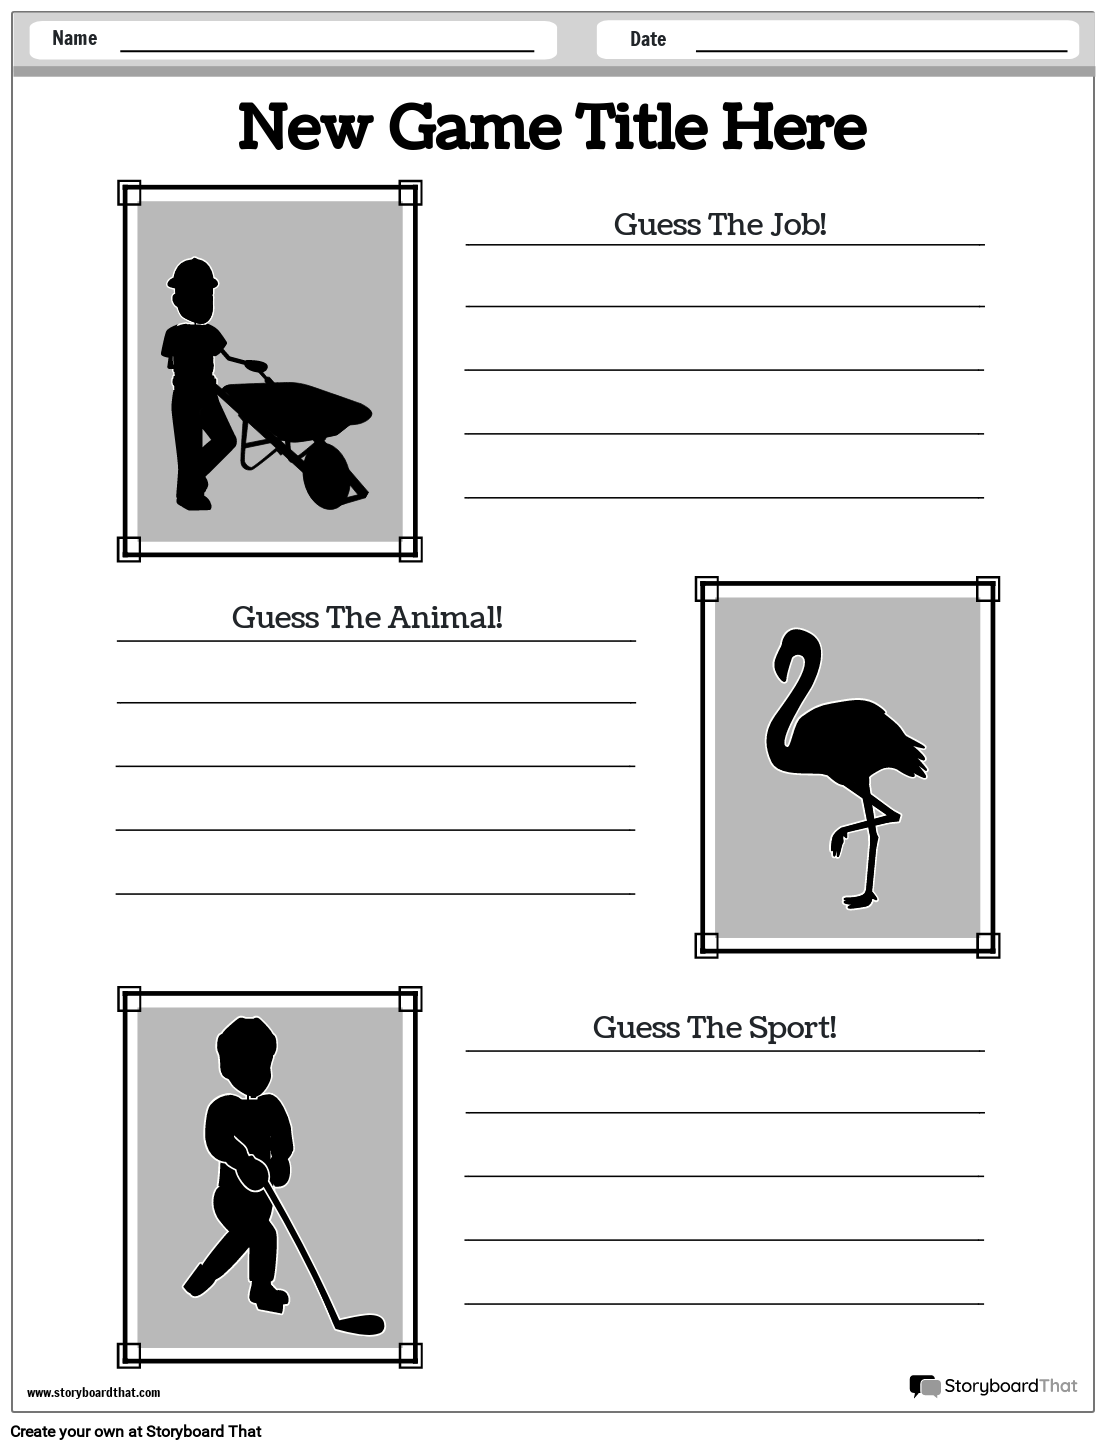 Game Worksheet Template with 3 Image Frames